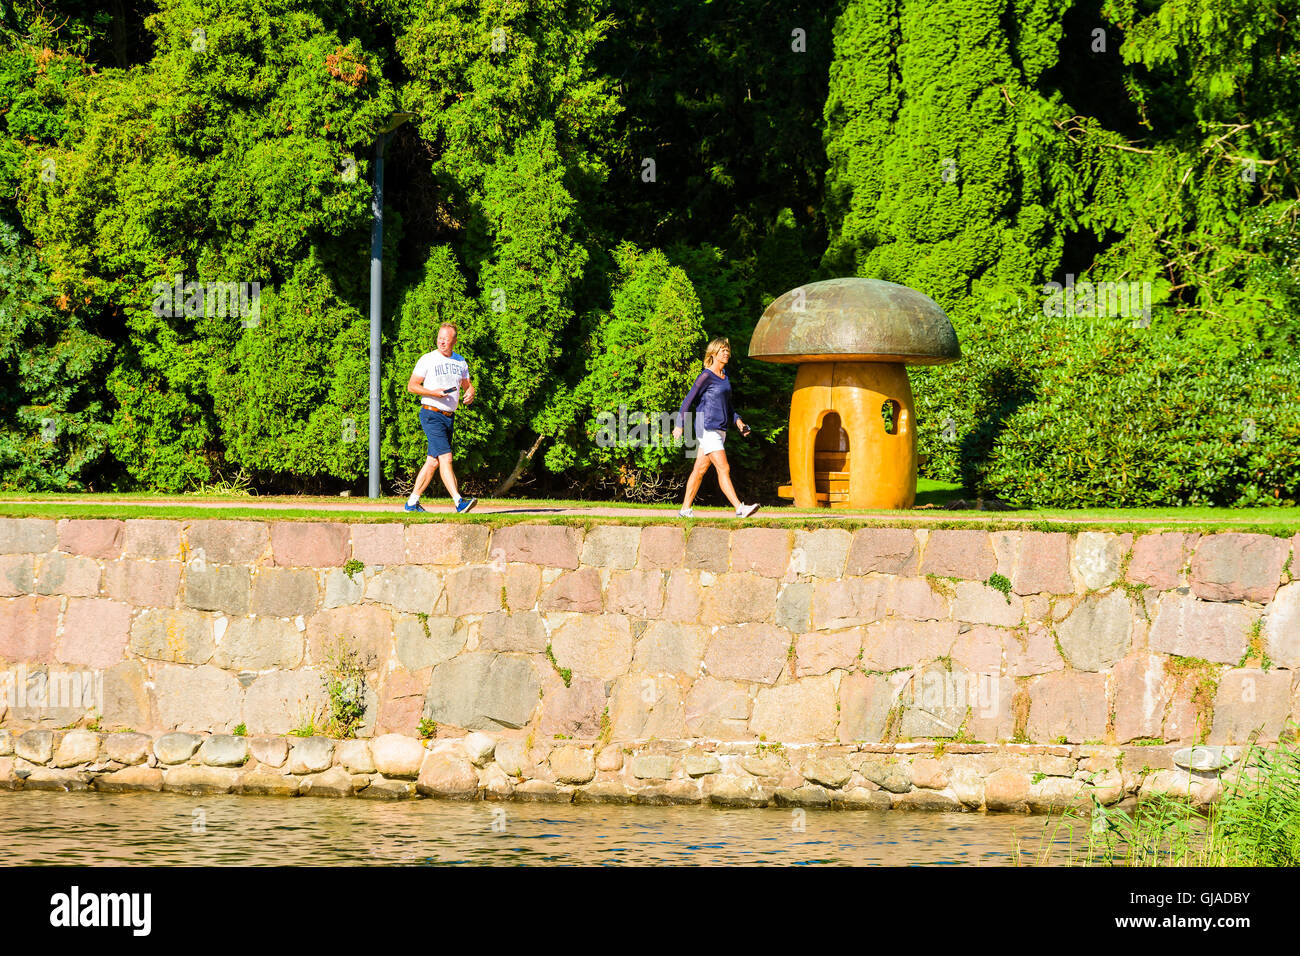 Kalmar, Sweden - August 10, 2016: Two persons walk by a large artificial mushroom in the public park Stadsparken in town. Stock Photo